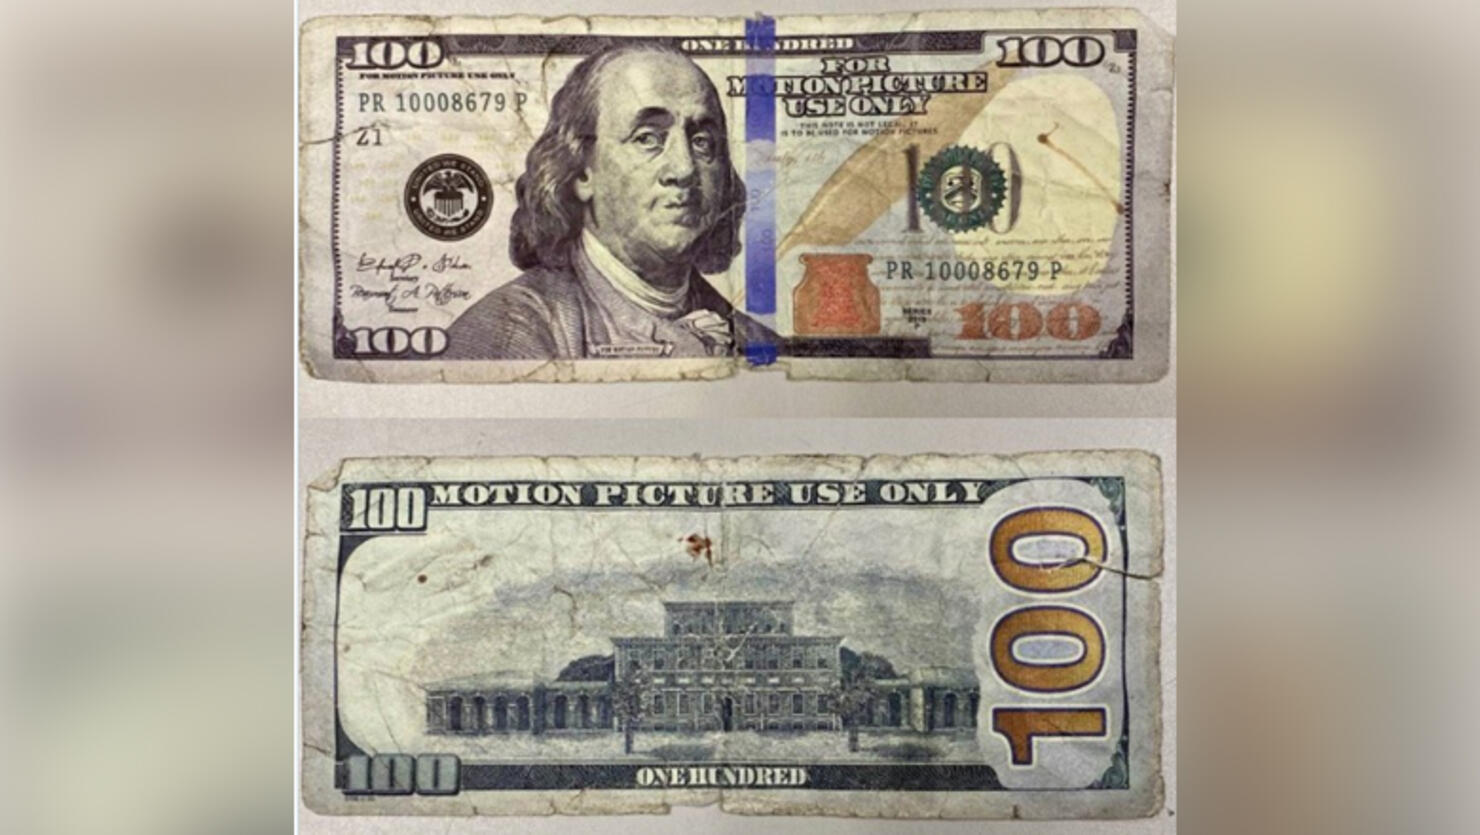 New Jersey Man Buys Gas With $100 Bill Marked 'For Motion Picture Use ...